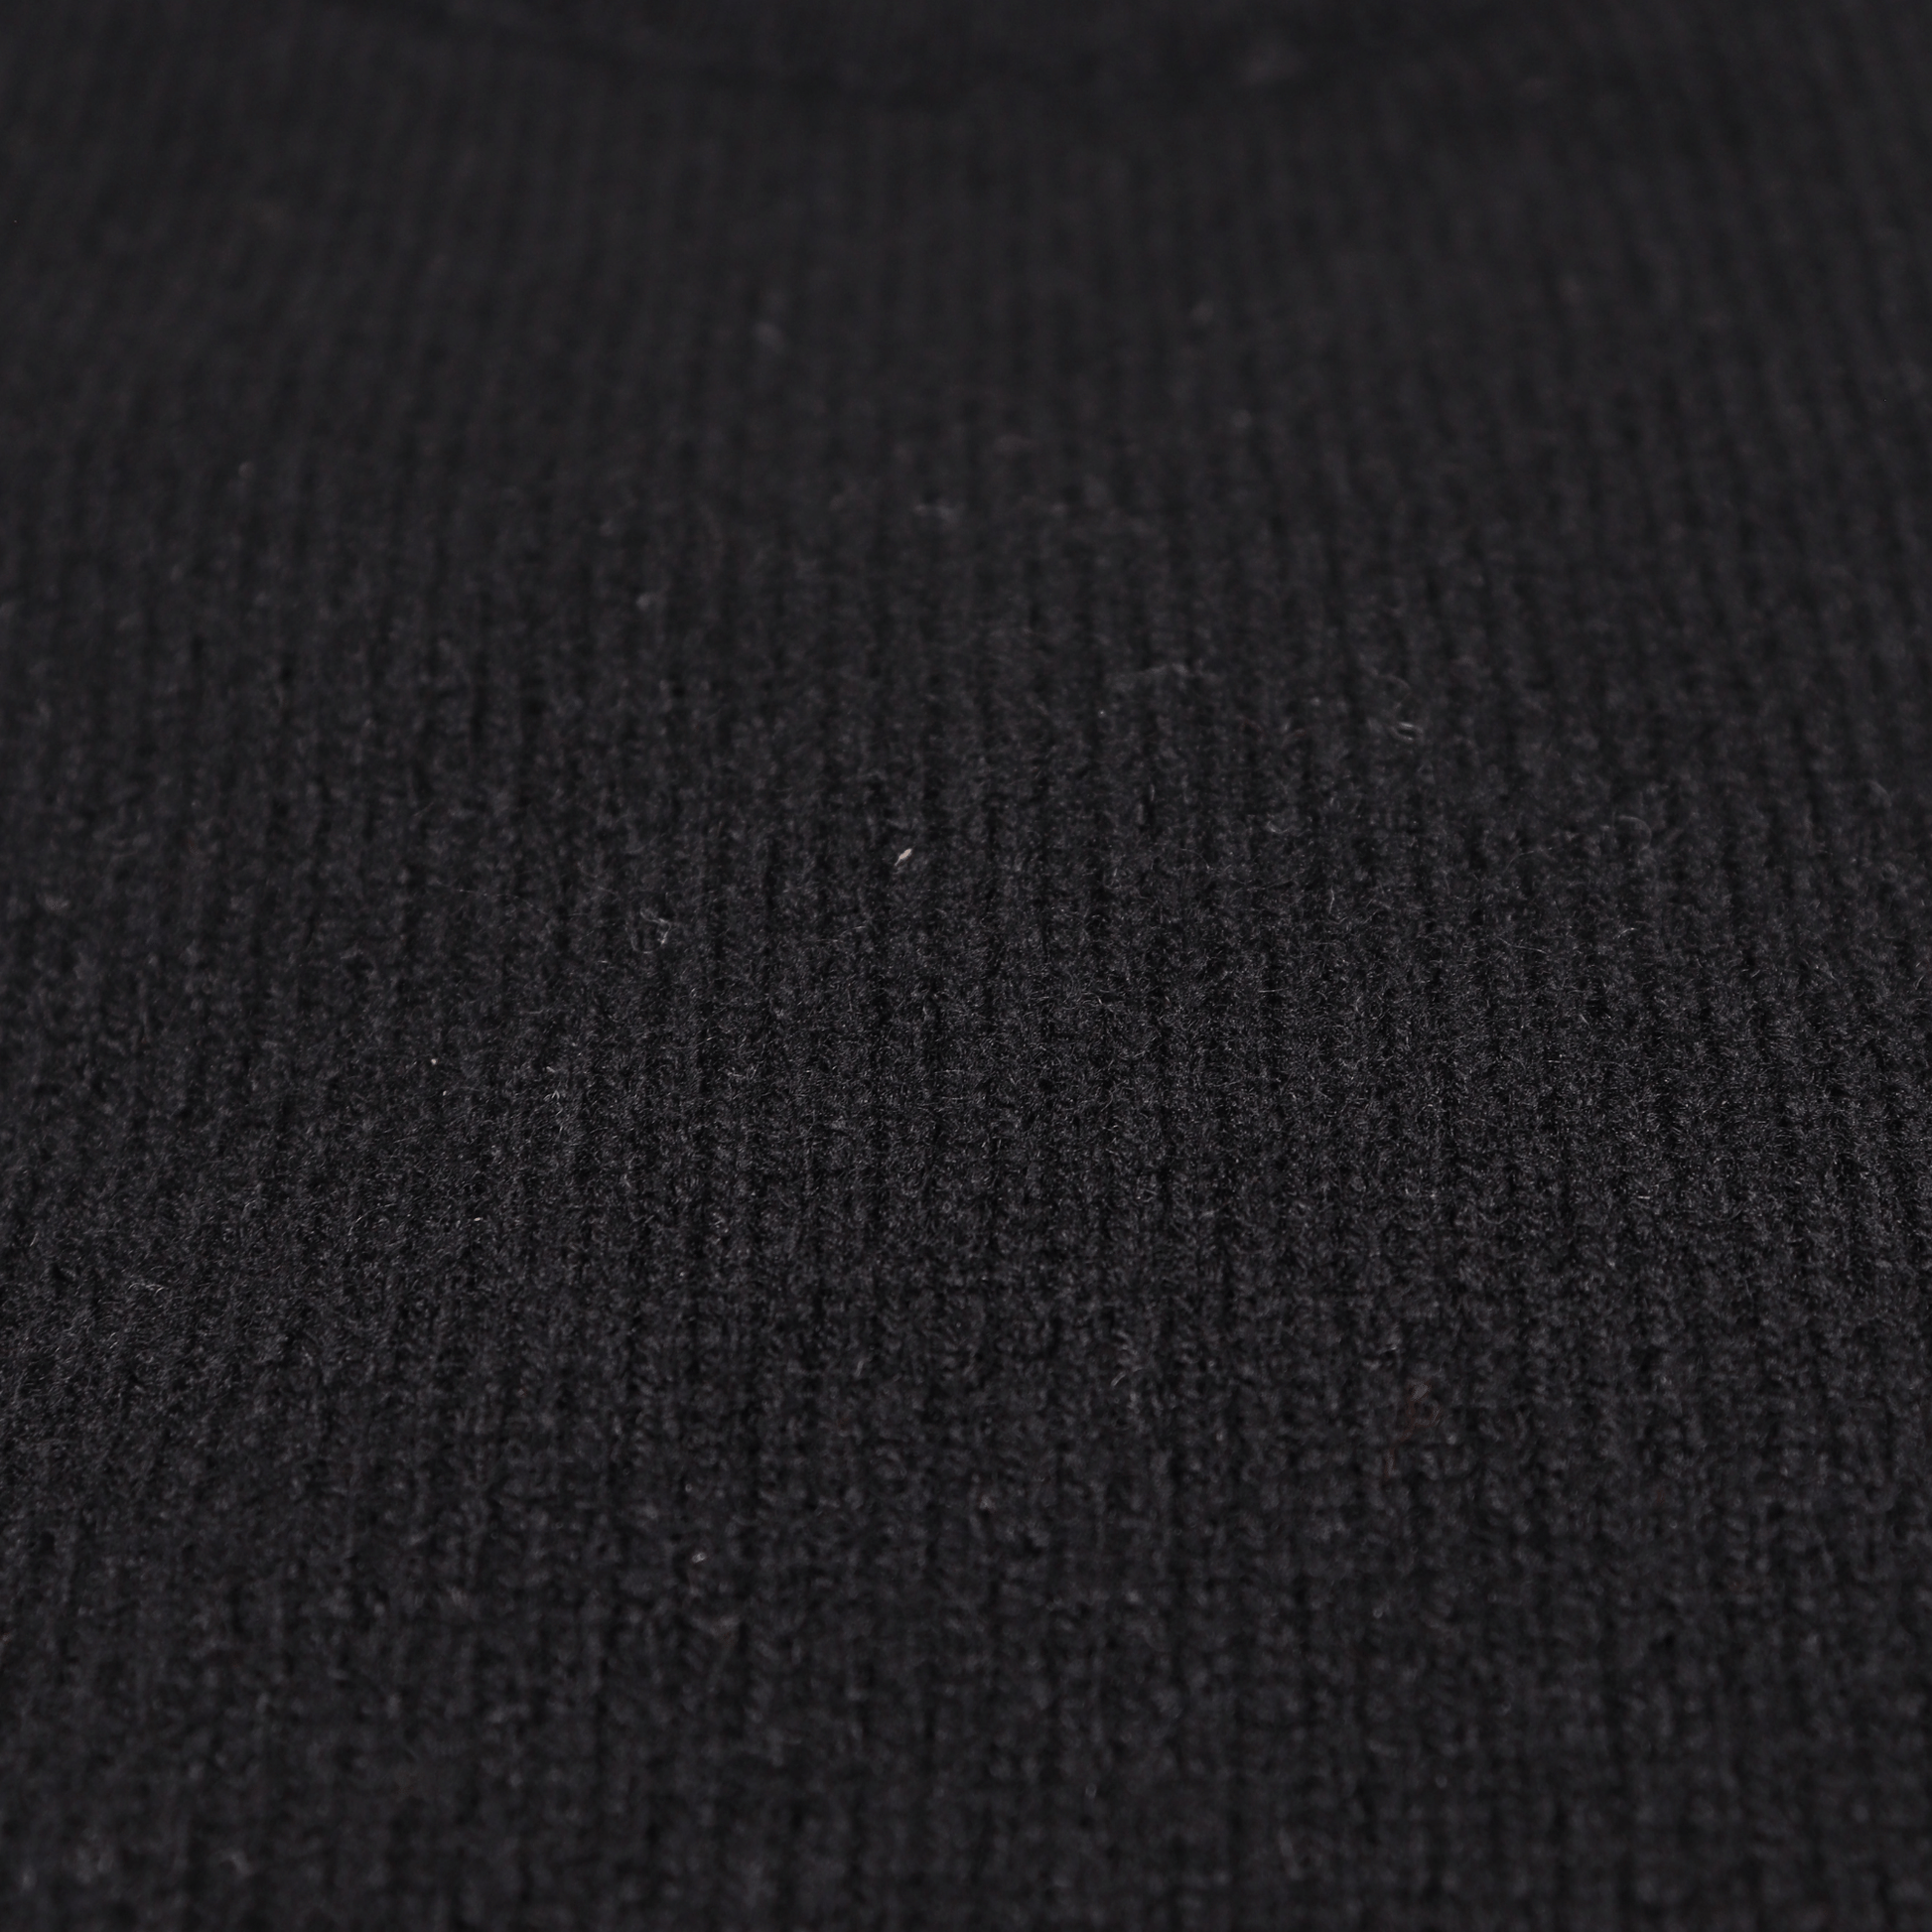 Stay warm and stylish with the Loch Lomond 100% lambswool long-sleeve jersey in Black (3696). Made from premium lambswool, this jersey offers both comfort and durability. Perfect for chilly days and evenings, it's a versatile addition to any wardrobe. Shop in-store at 337 Monty Naicker Street, Durban or online at www.omarstailors.com